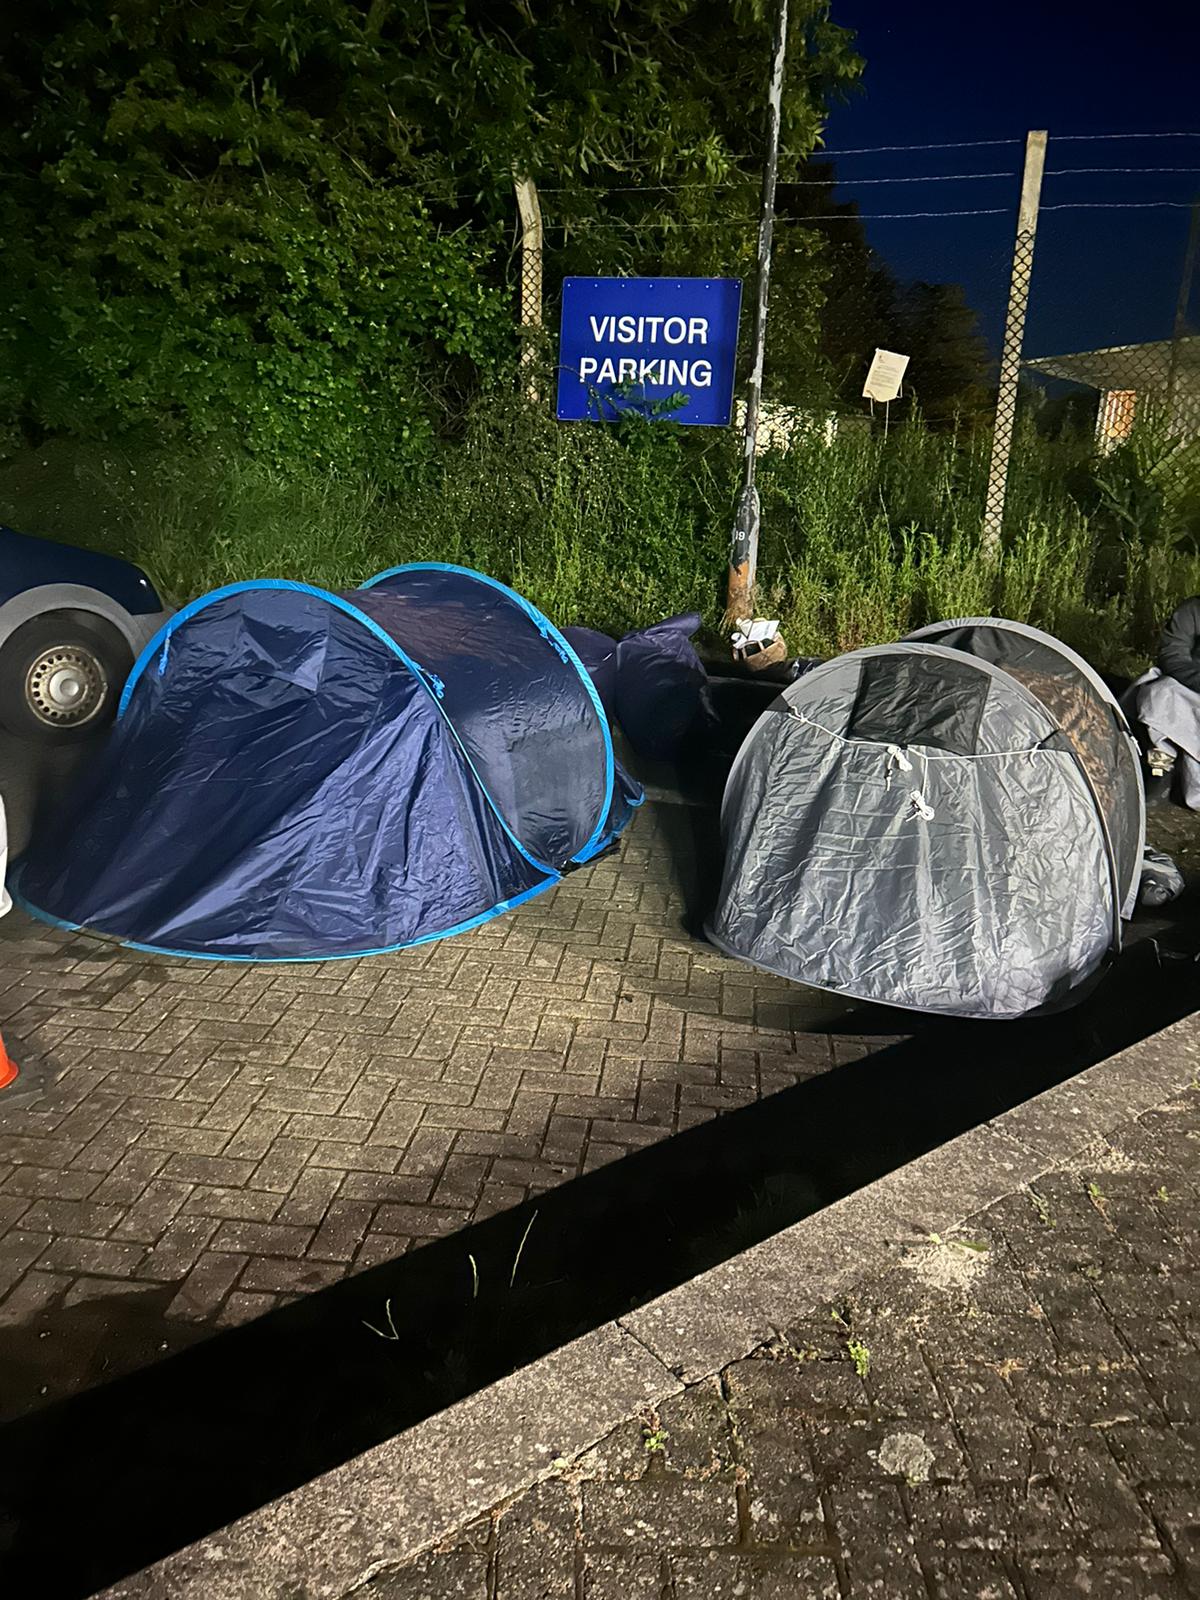 Local charity workers for Care4Calais provided asylum seekers with tents when they got trapped outside Wethersfield for a night